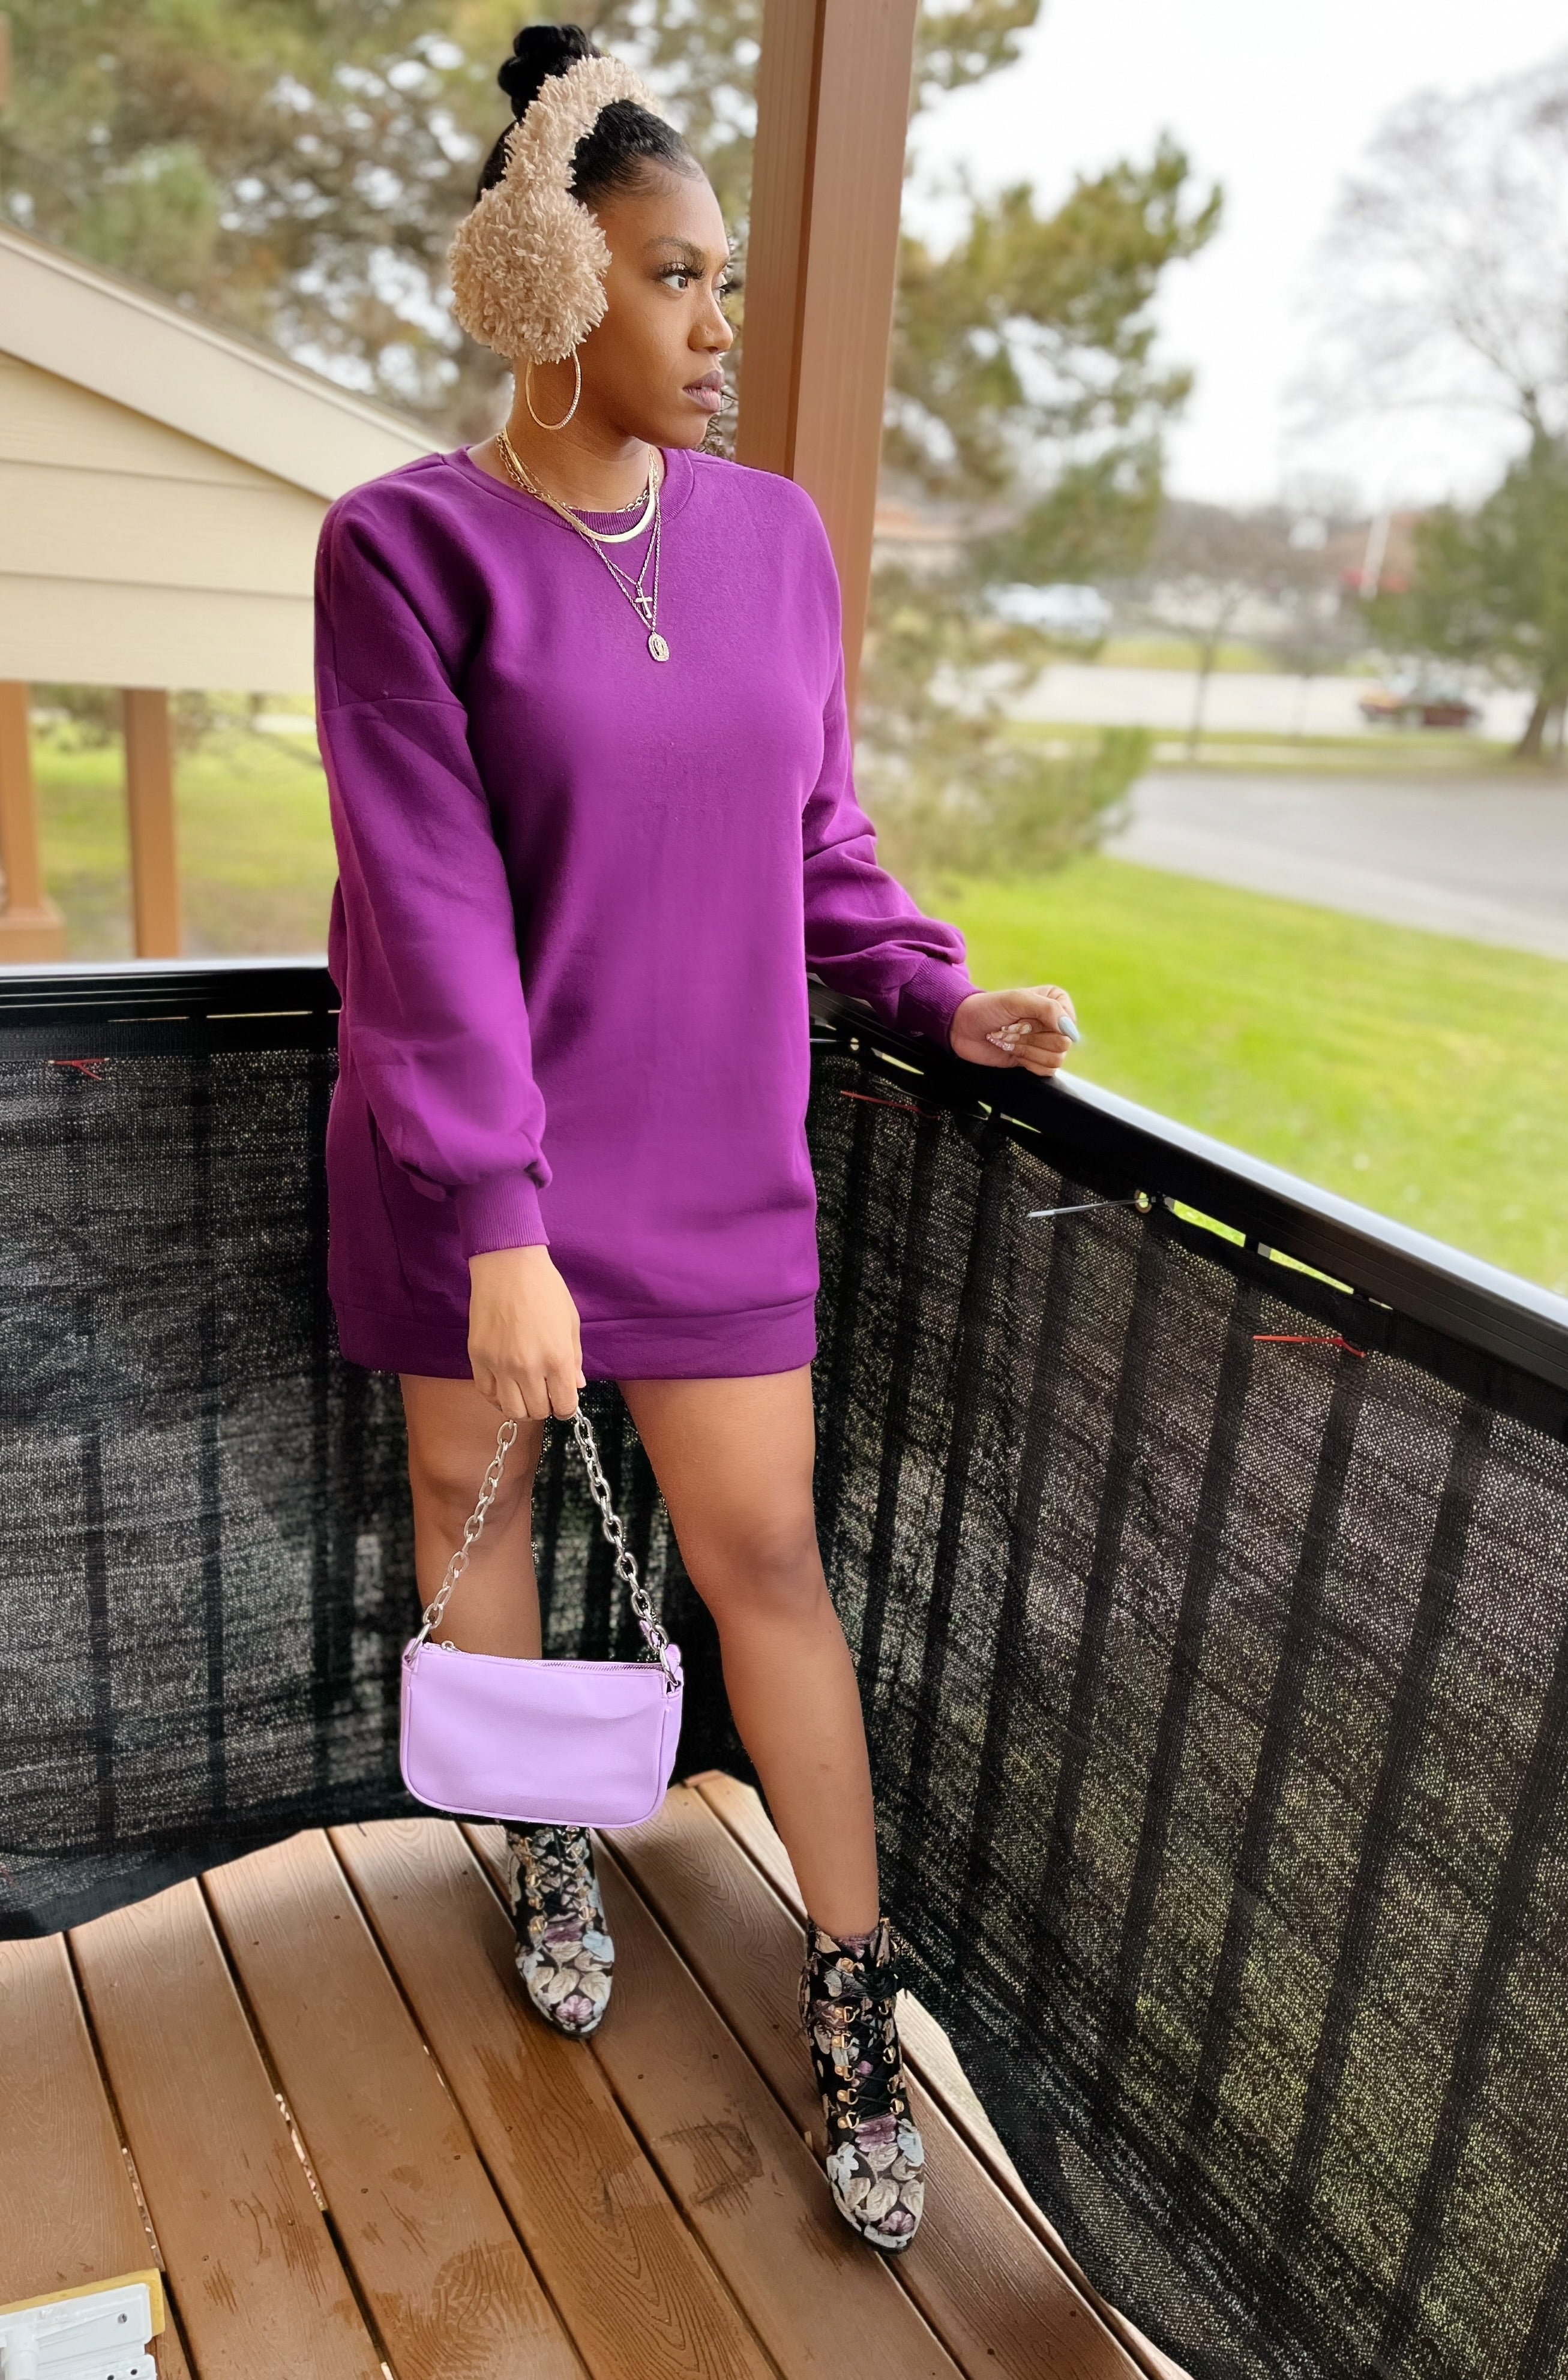 12 Outfit: Pink & Purple ideas